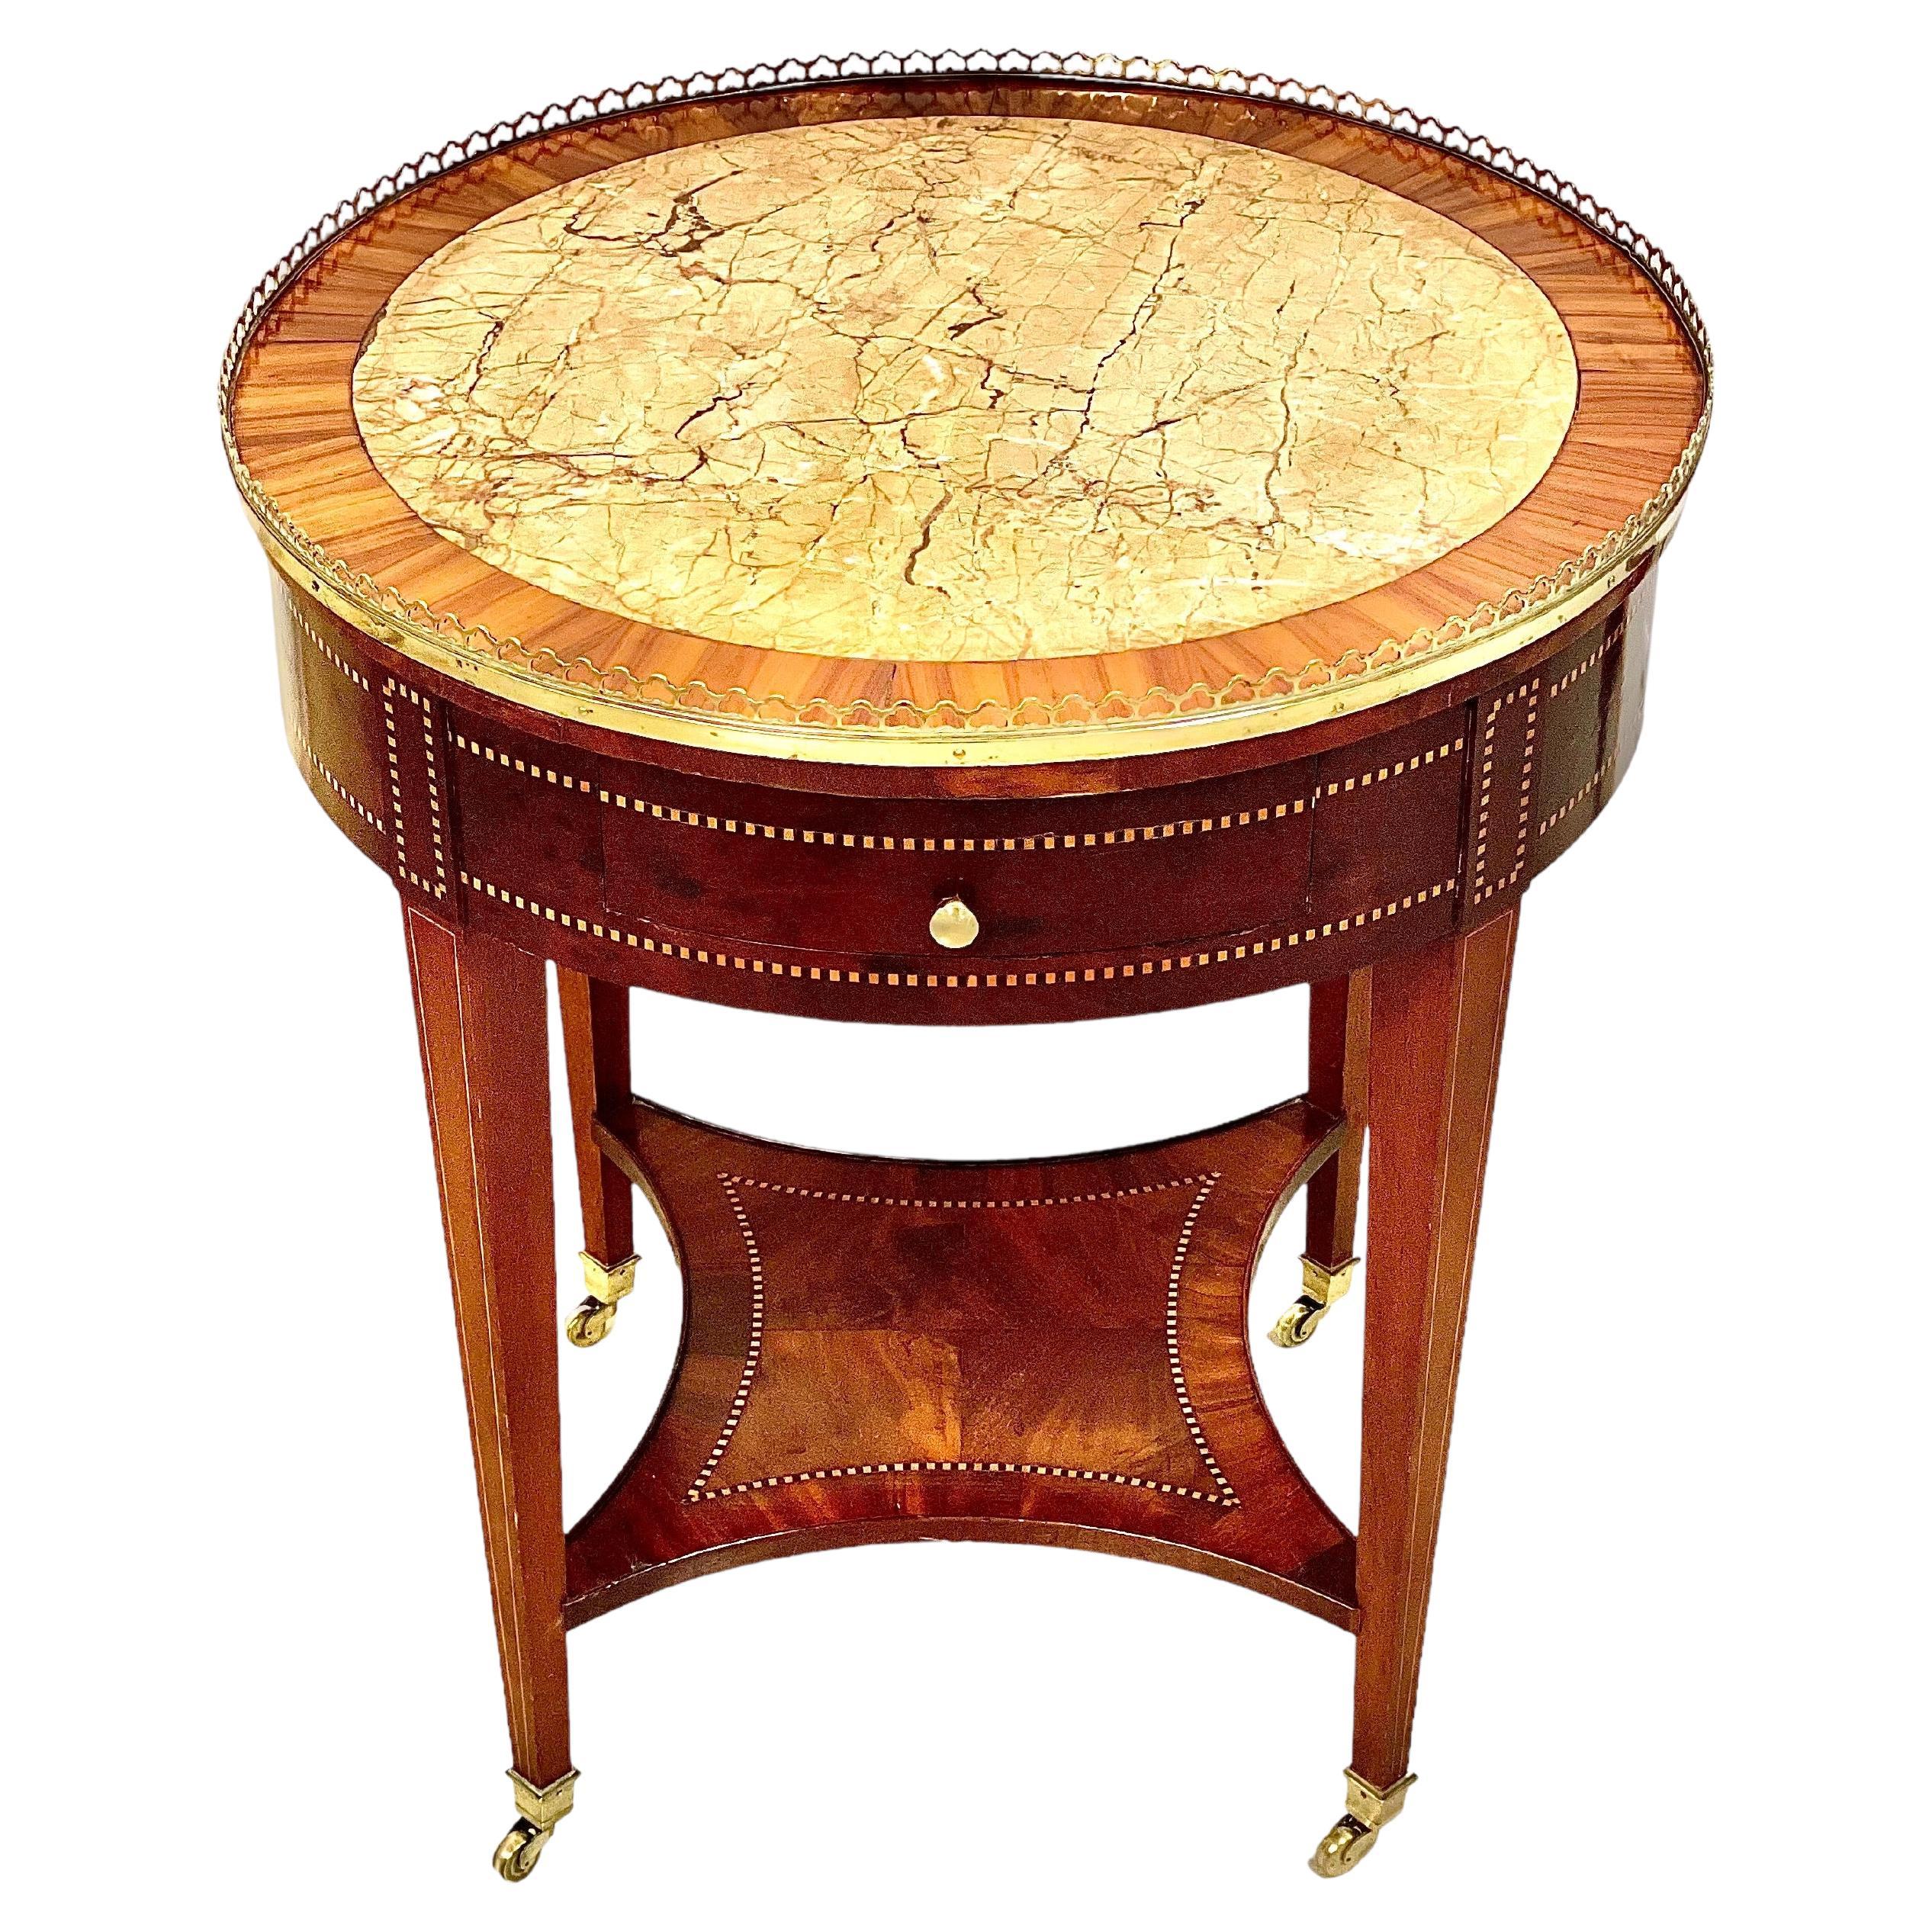 19th Century French Marquetry Inlaid Gueridon Table